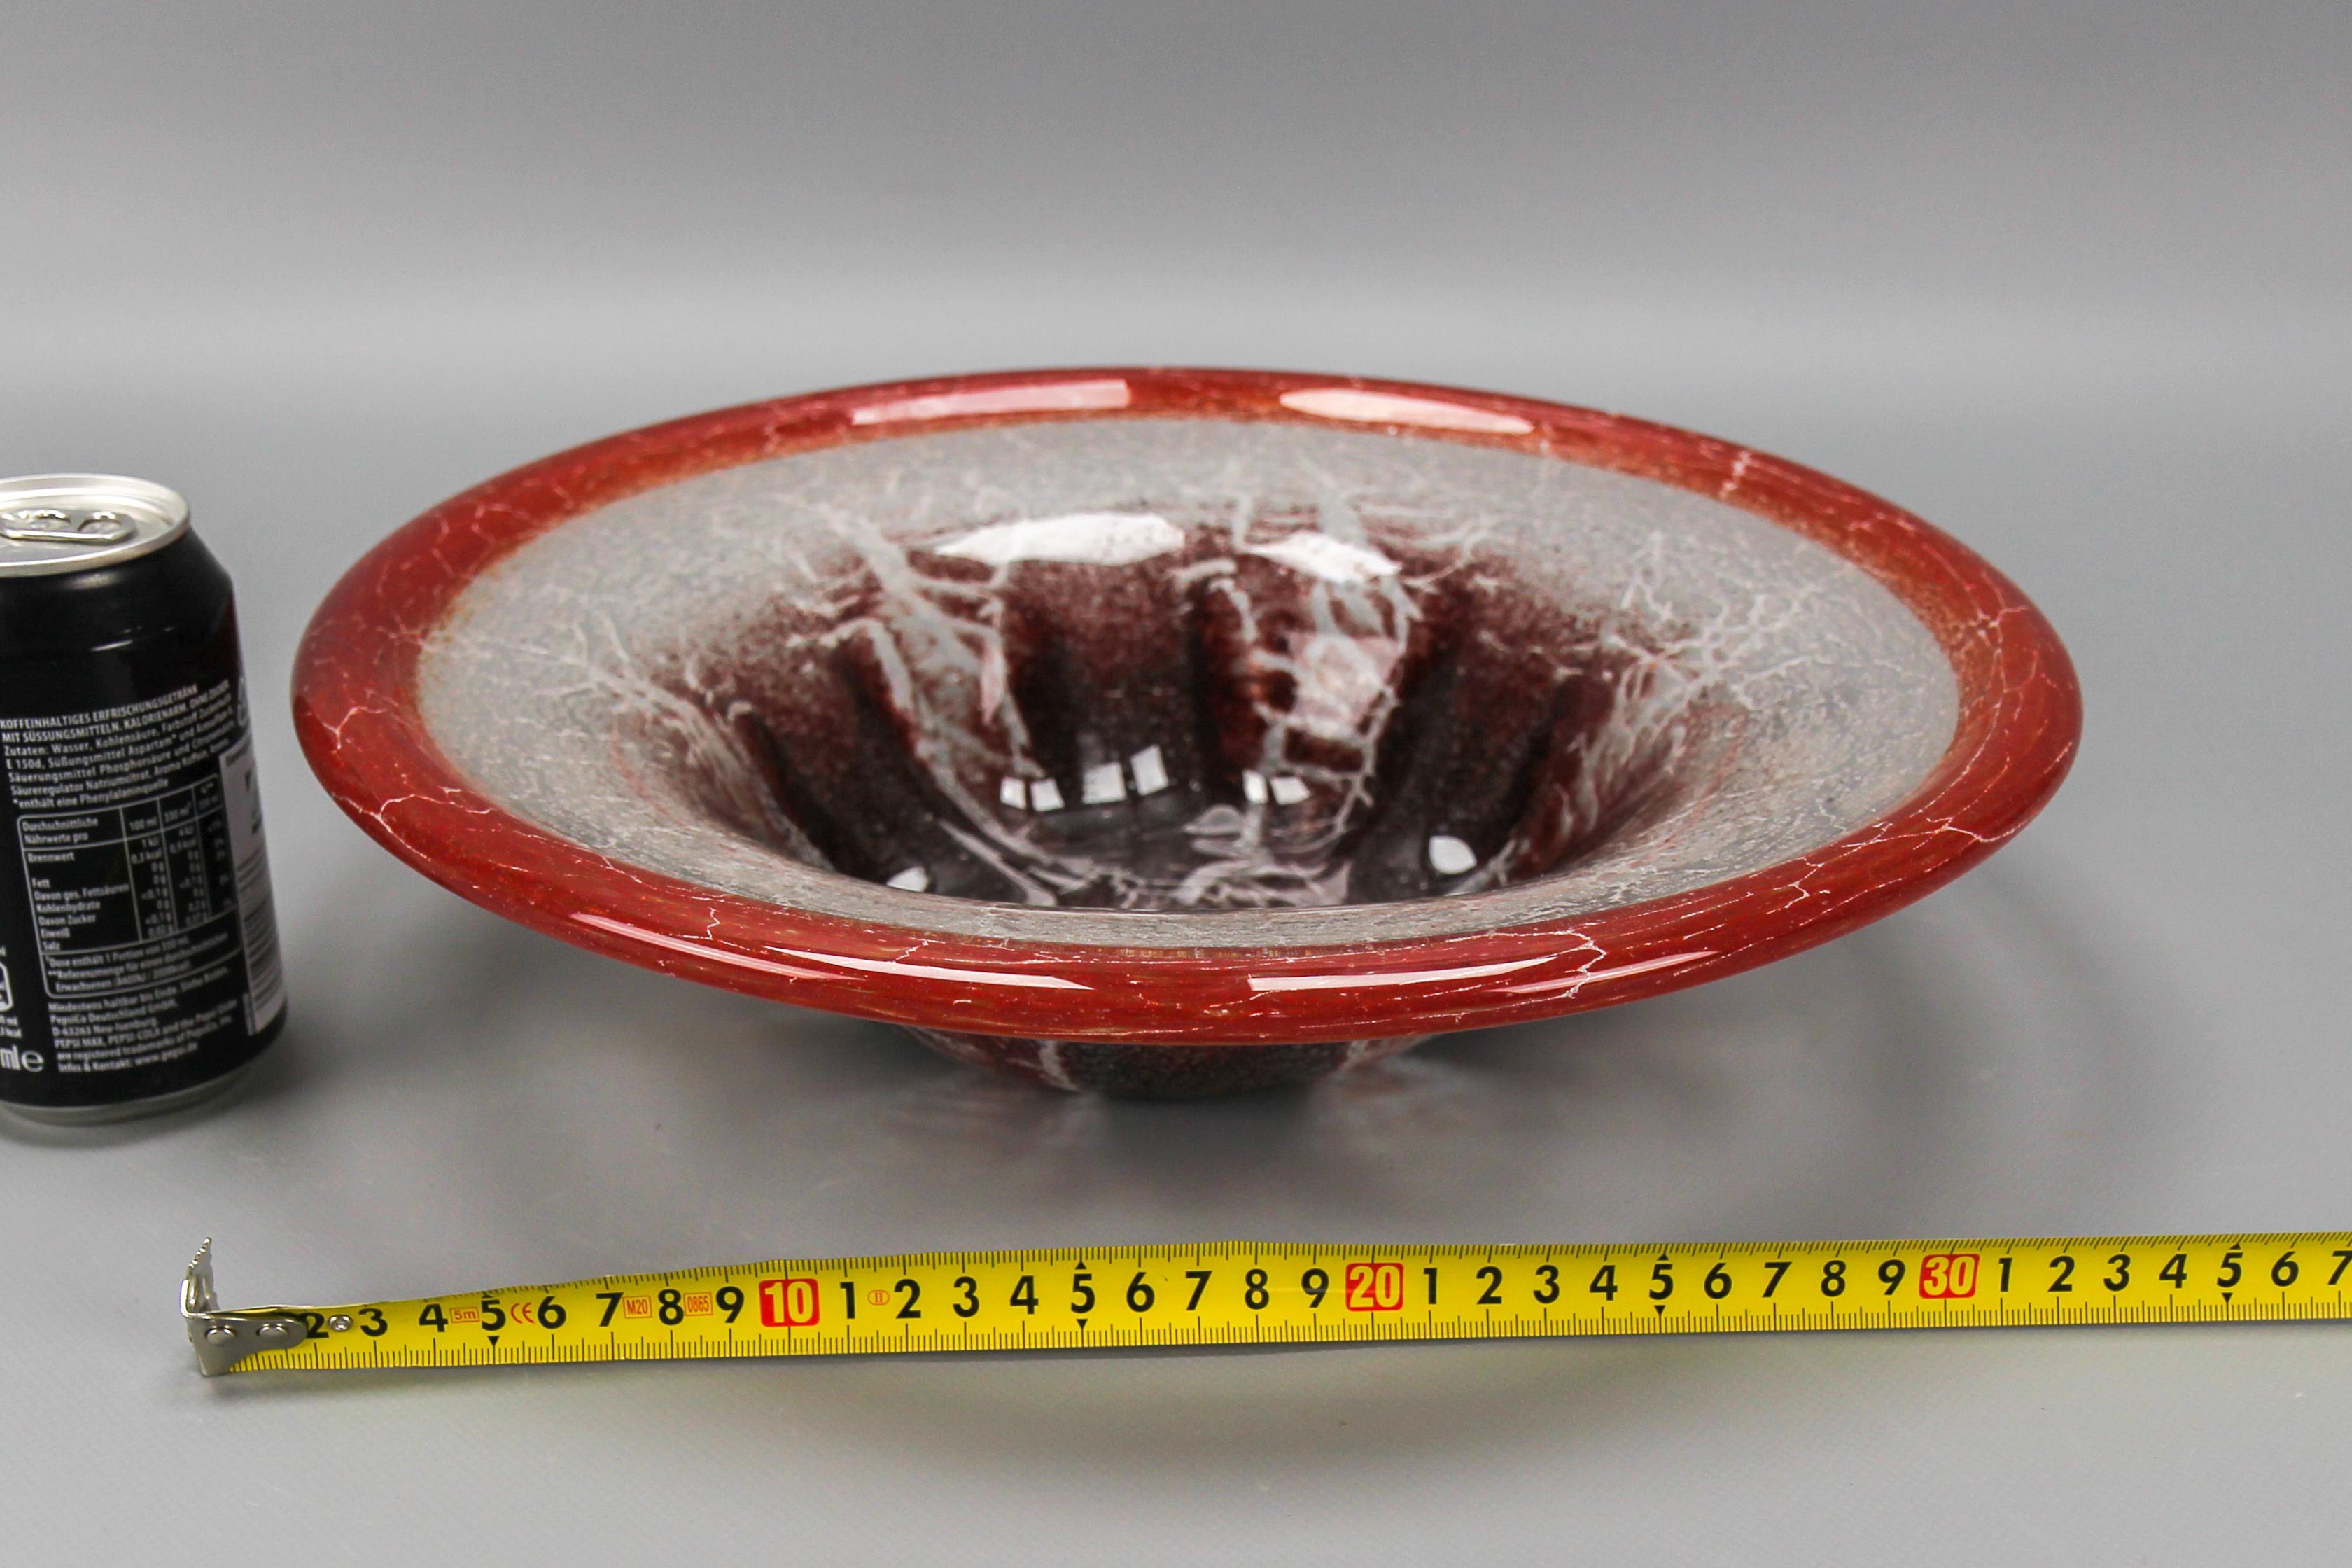 German Ikora Art Glass Bowl in Red, White and Burgundy by WMF, ca. 1930s For Sale 8